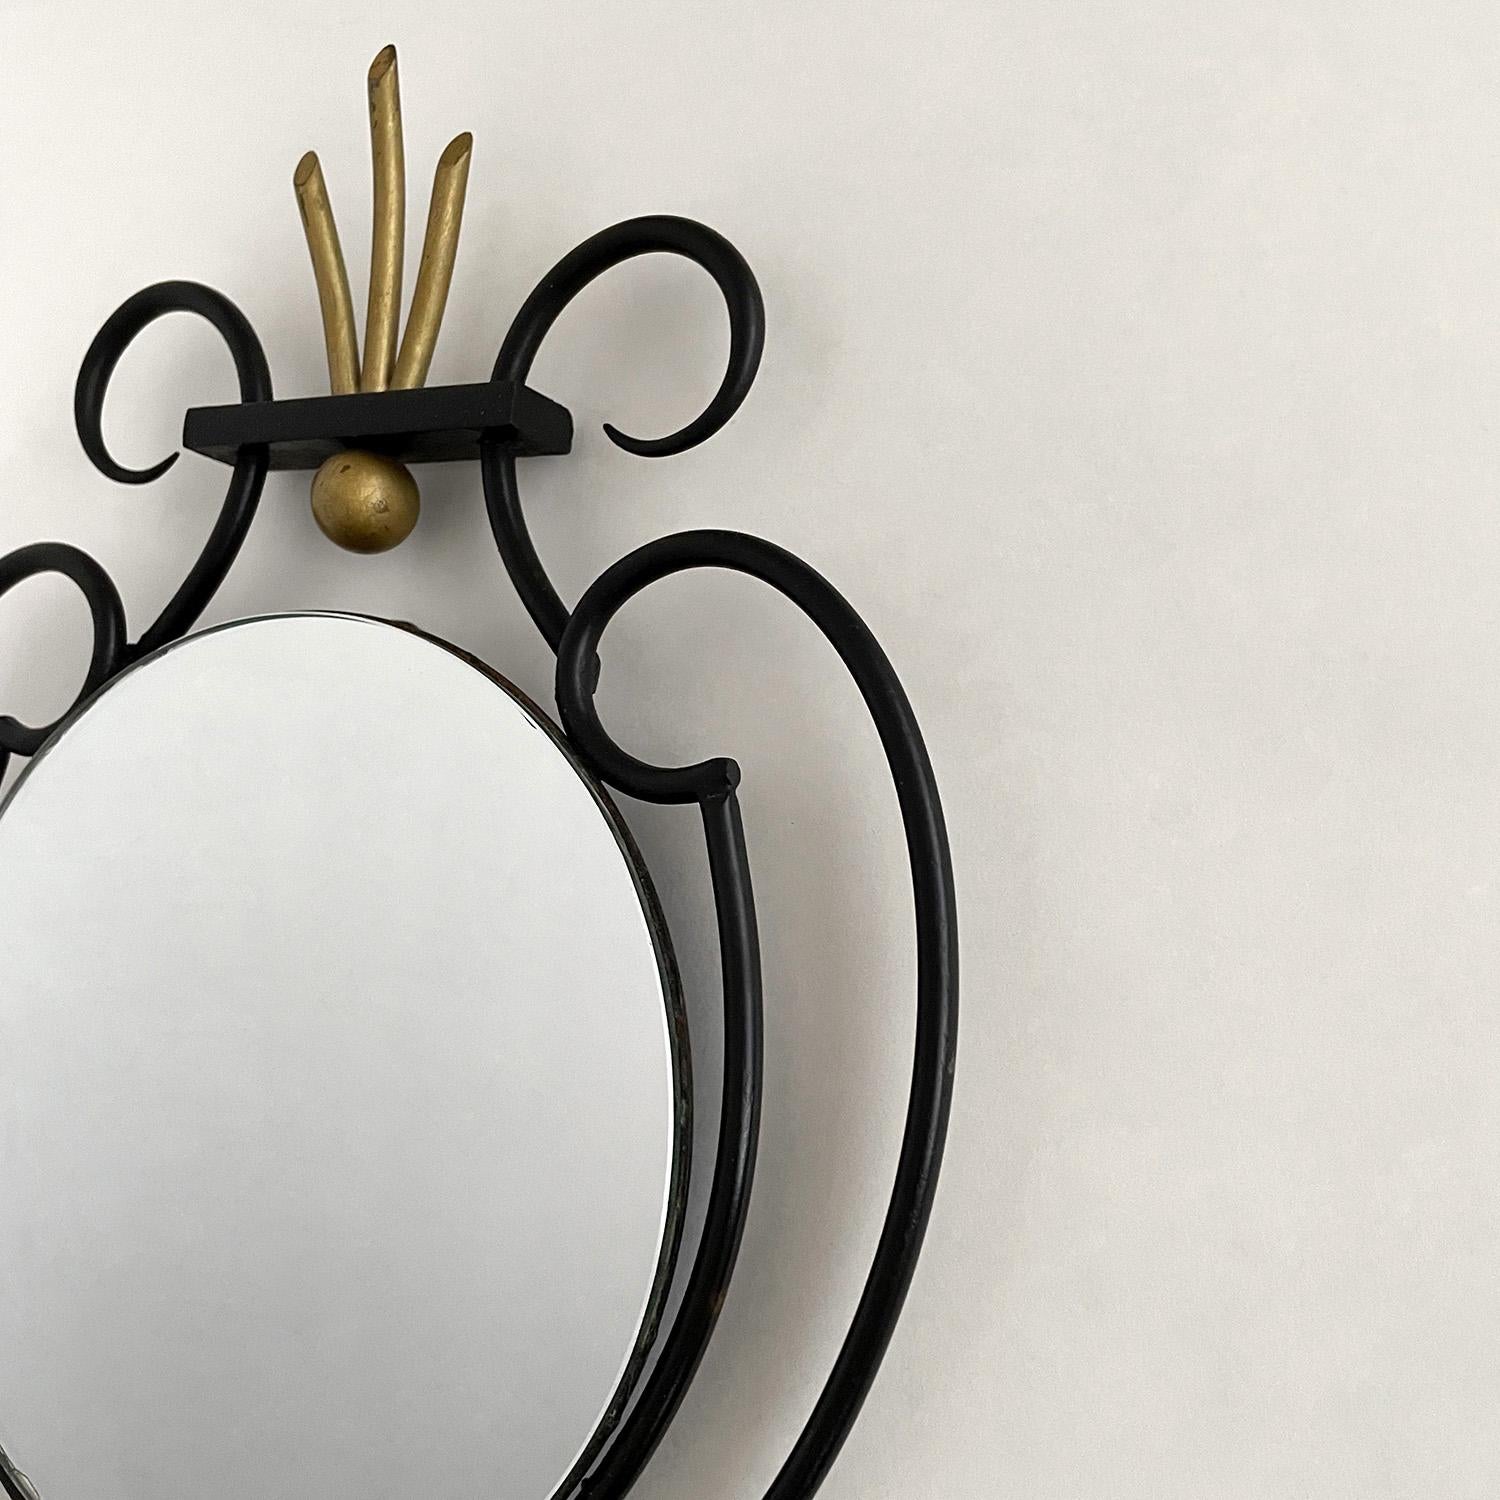 Petite French iron mirror
France, circa 1950s
Hand sculpted iron frame with wonderful brass toned accents
Equal parts charming and delightful, this piece is all about the details
This mirror will bring a smile to anyone who encounters